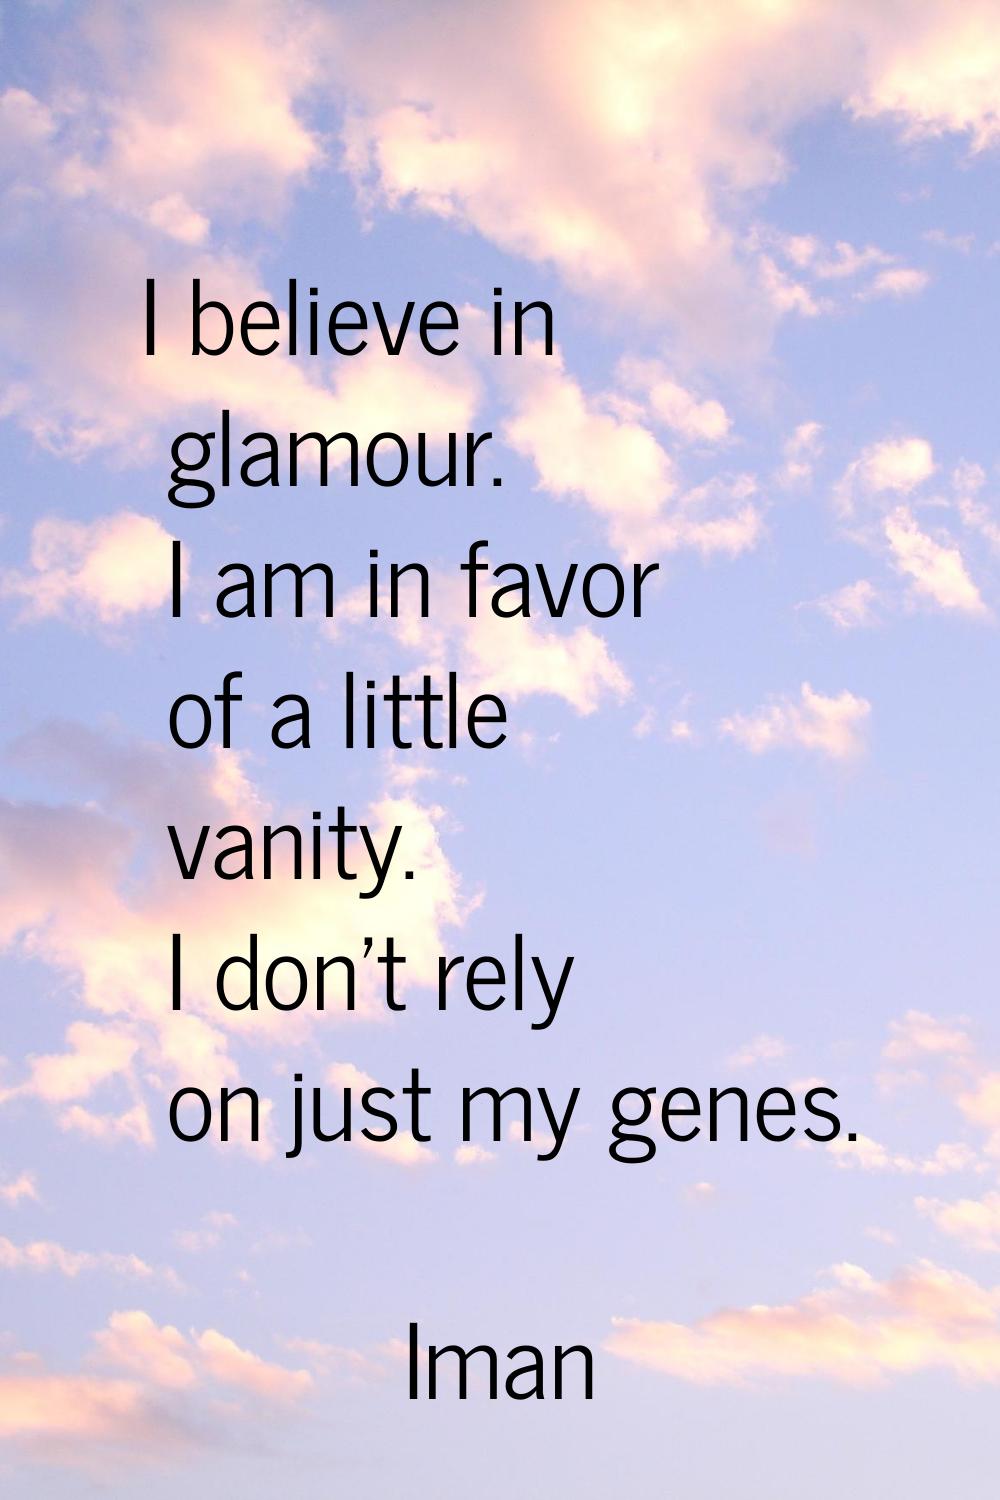 I believe in glamour. I am in favor of a little vanity. I don't rely on just my genes.